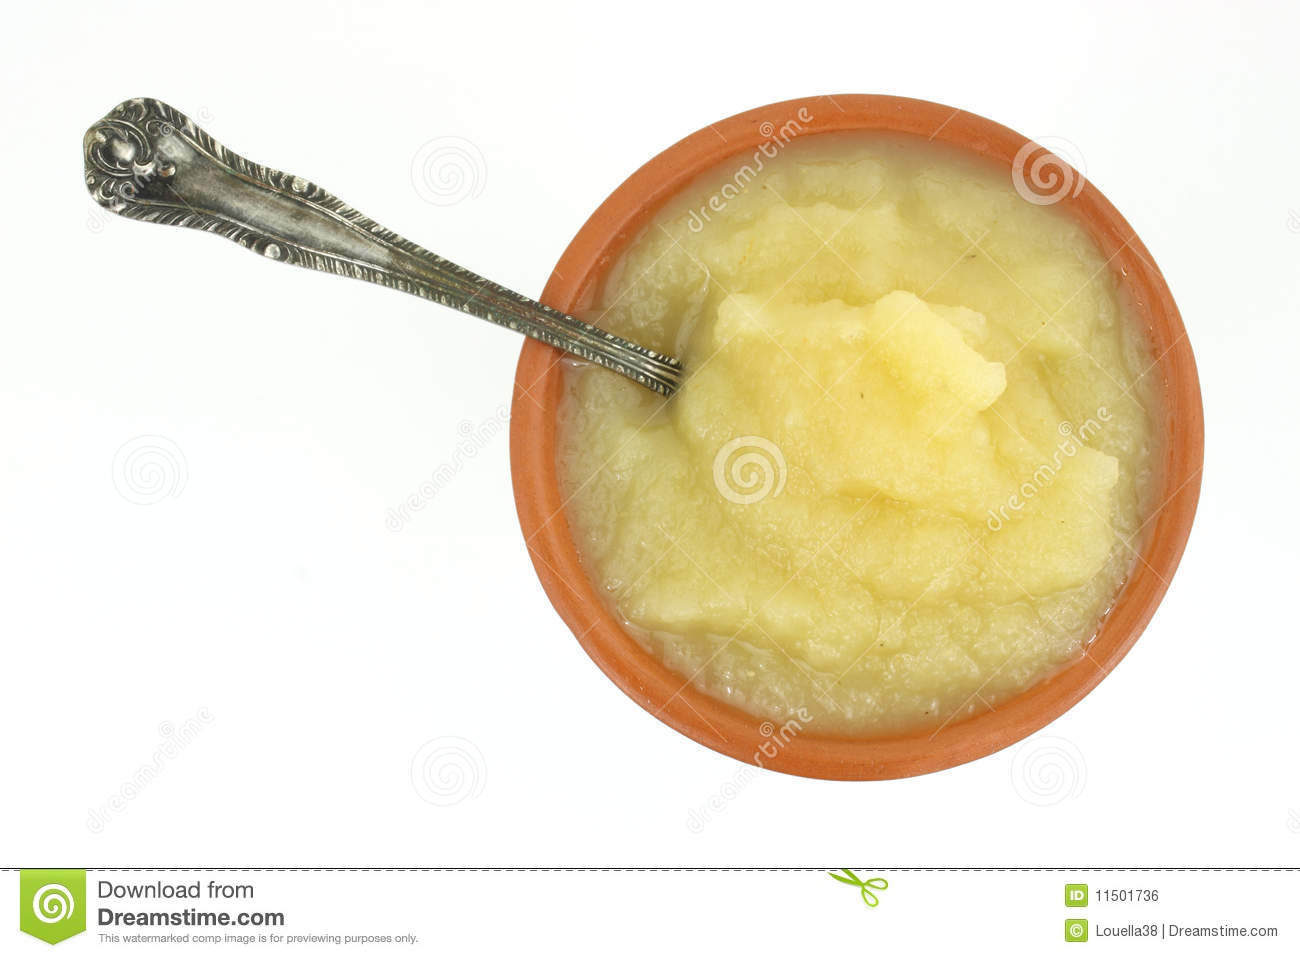 Apple sauce top with spoon Royalty Free Stock Image